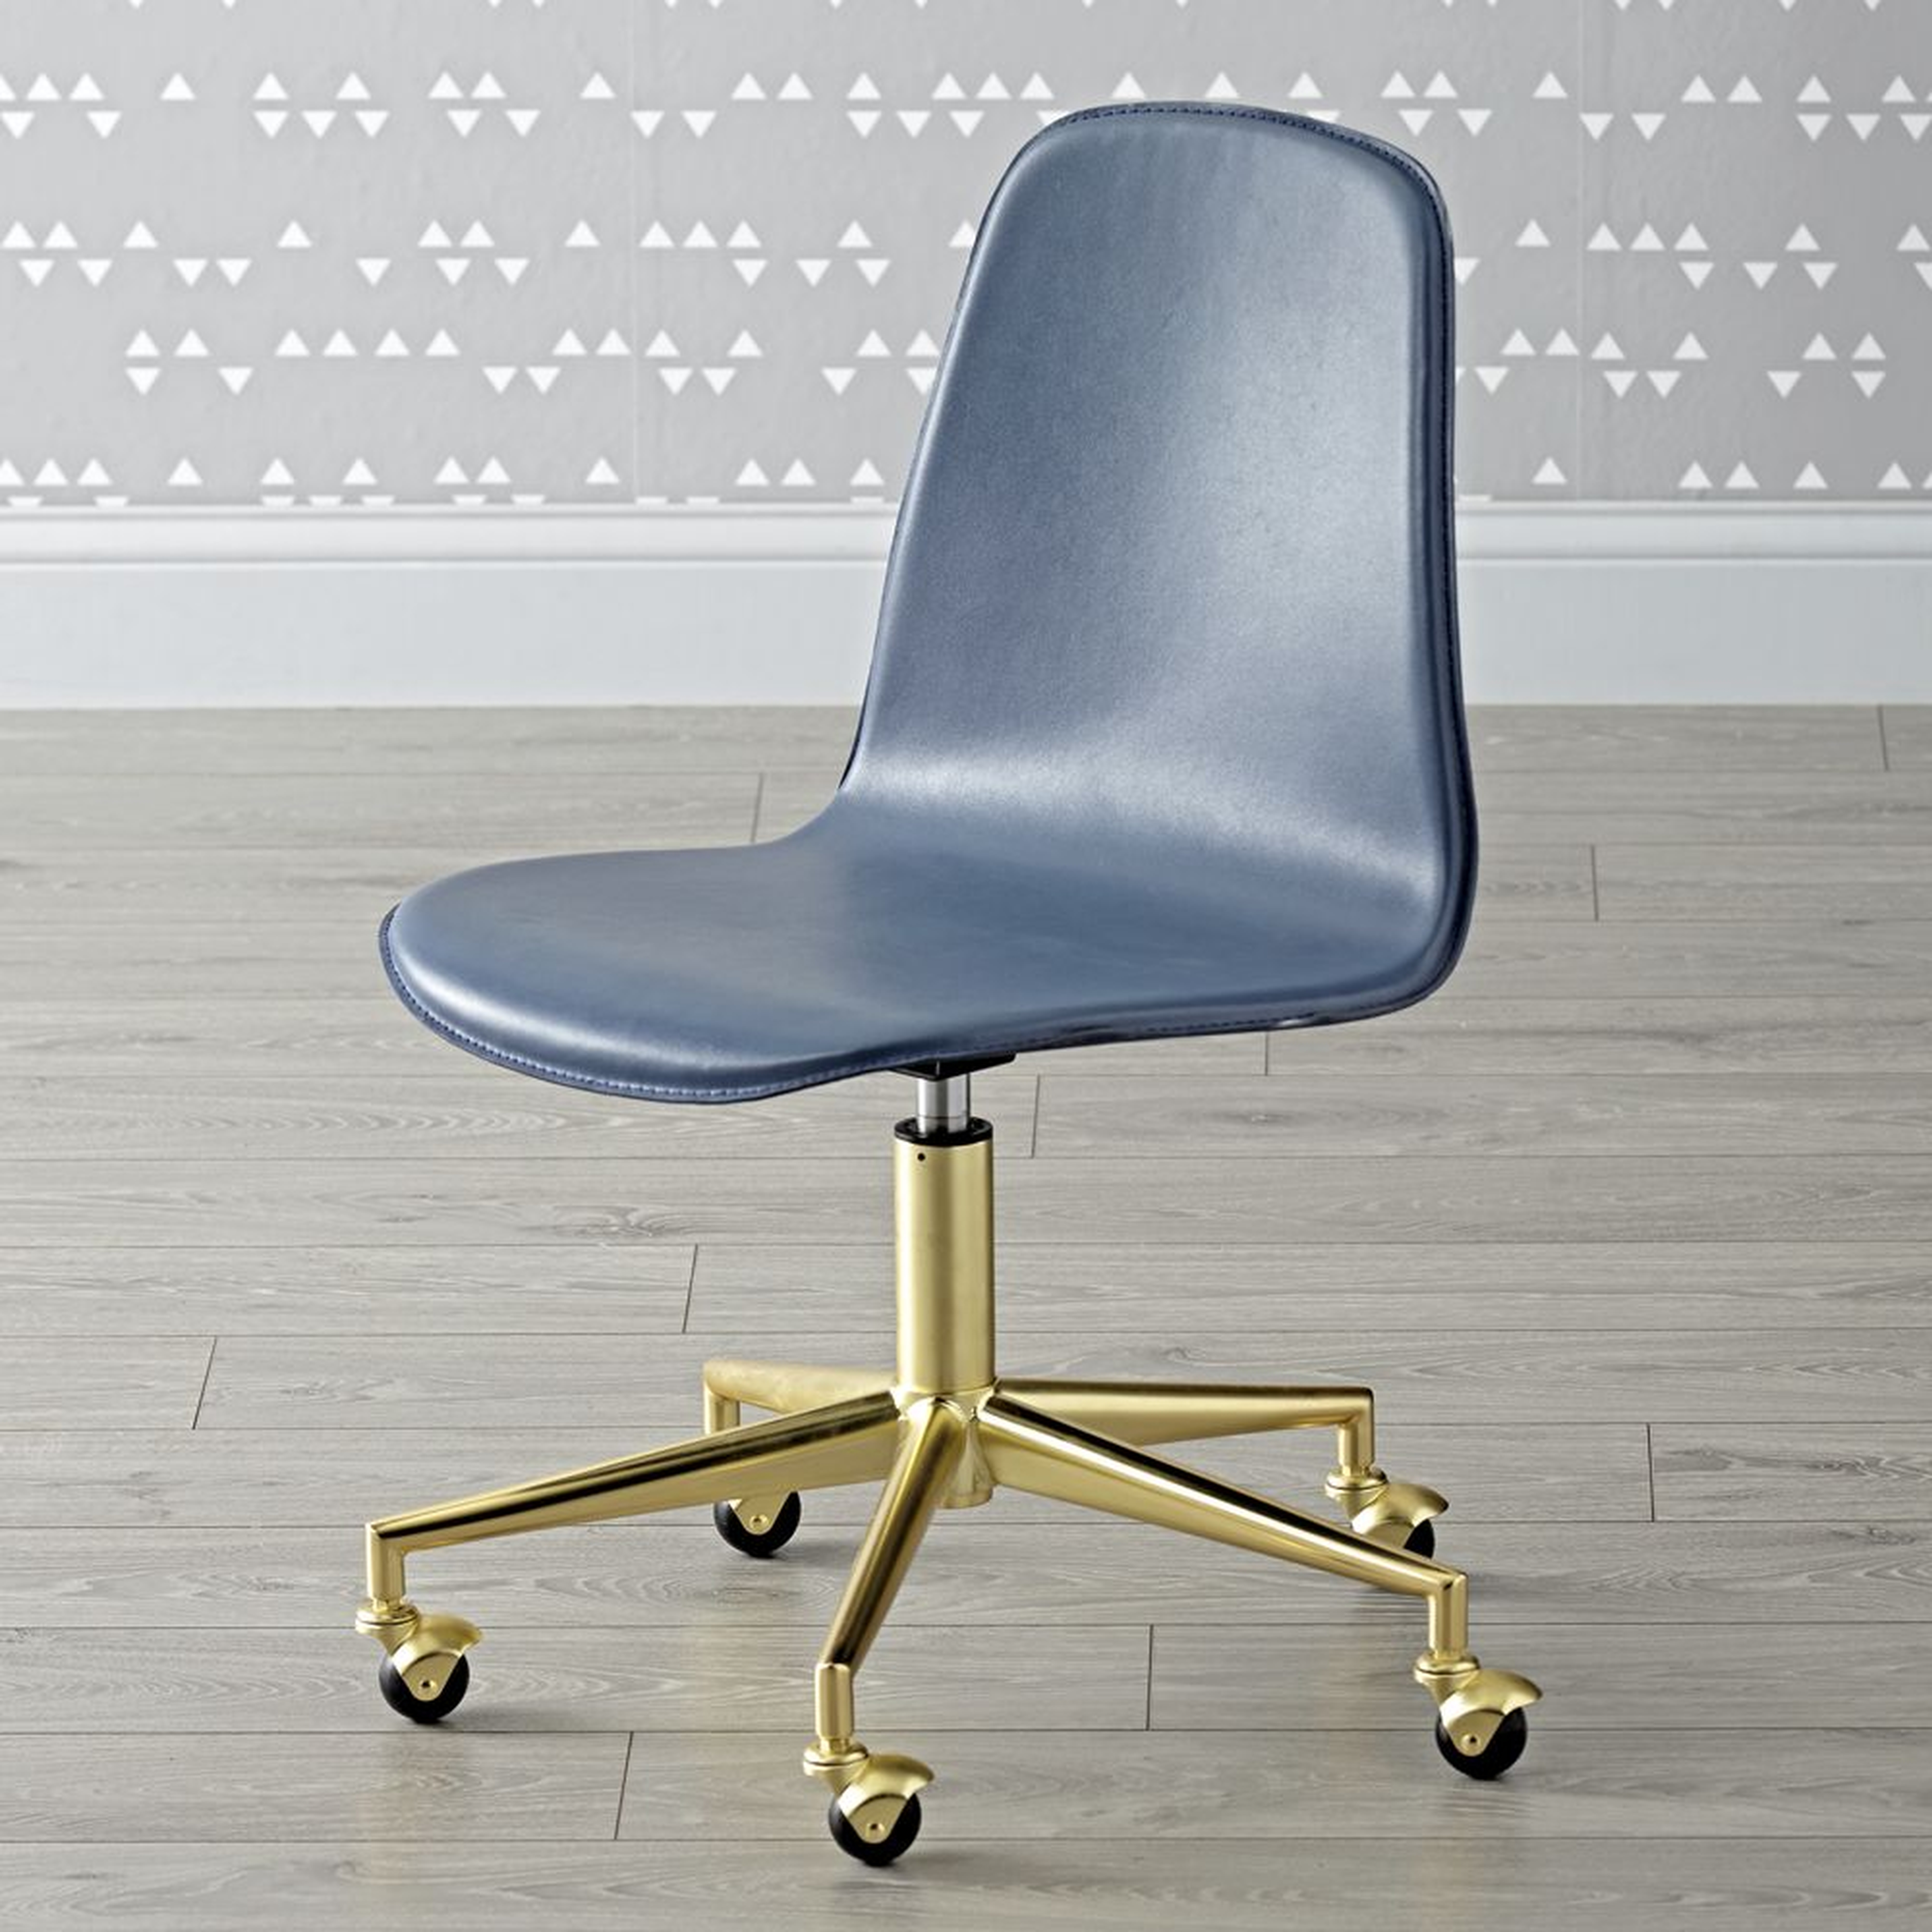 Kids Class Act Dark Blue and Gold Desk Chair - Crate and Barrel